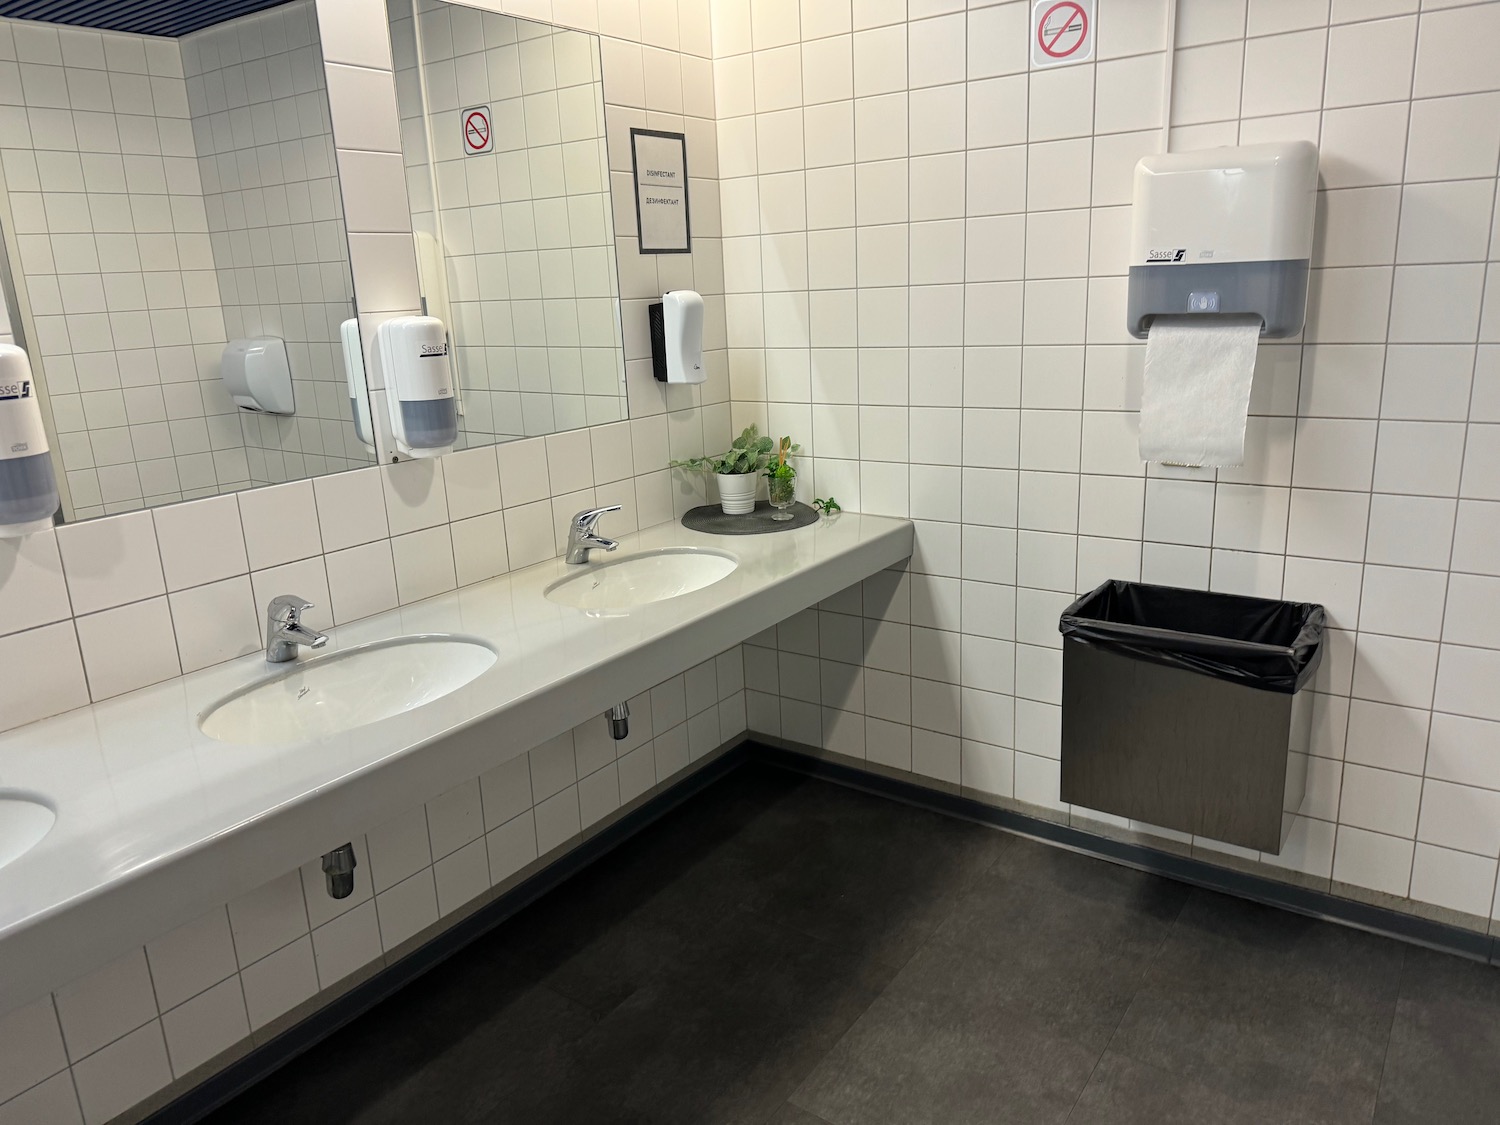 a bathroom with white tile walls and sinks